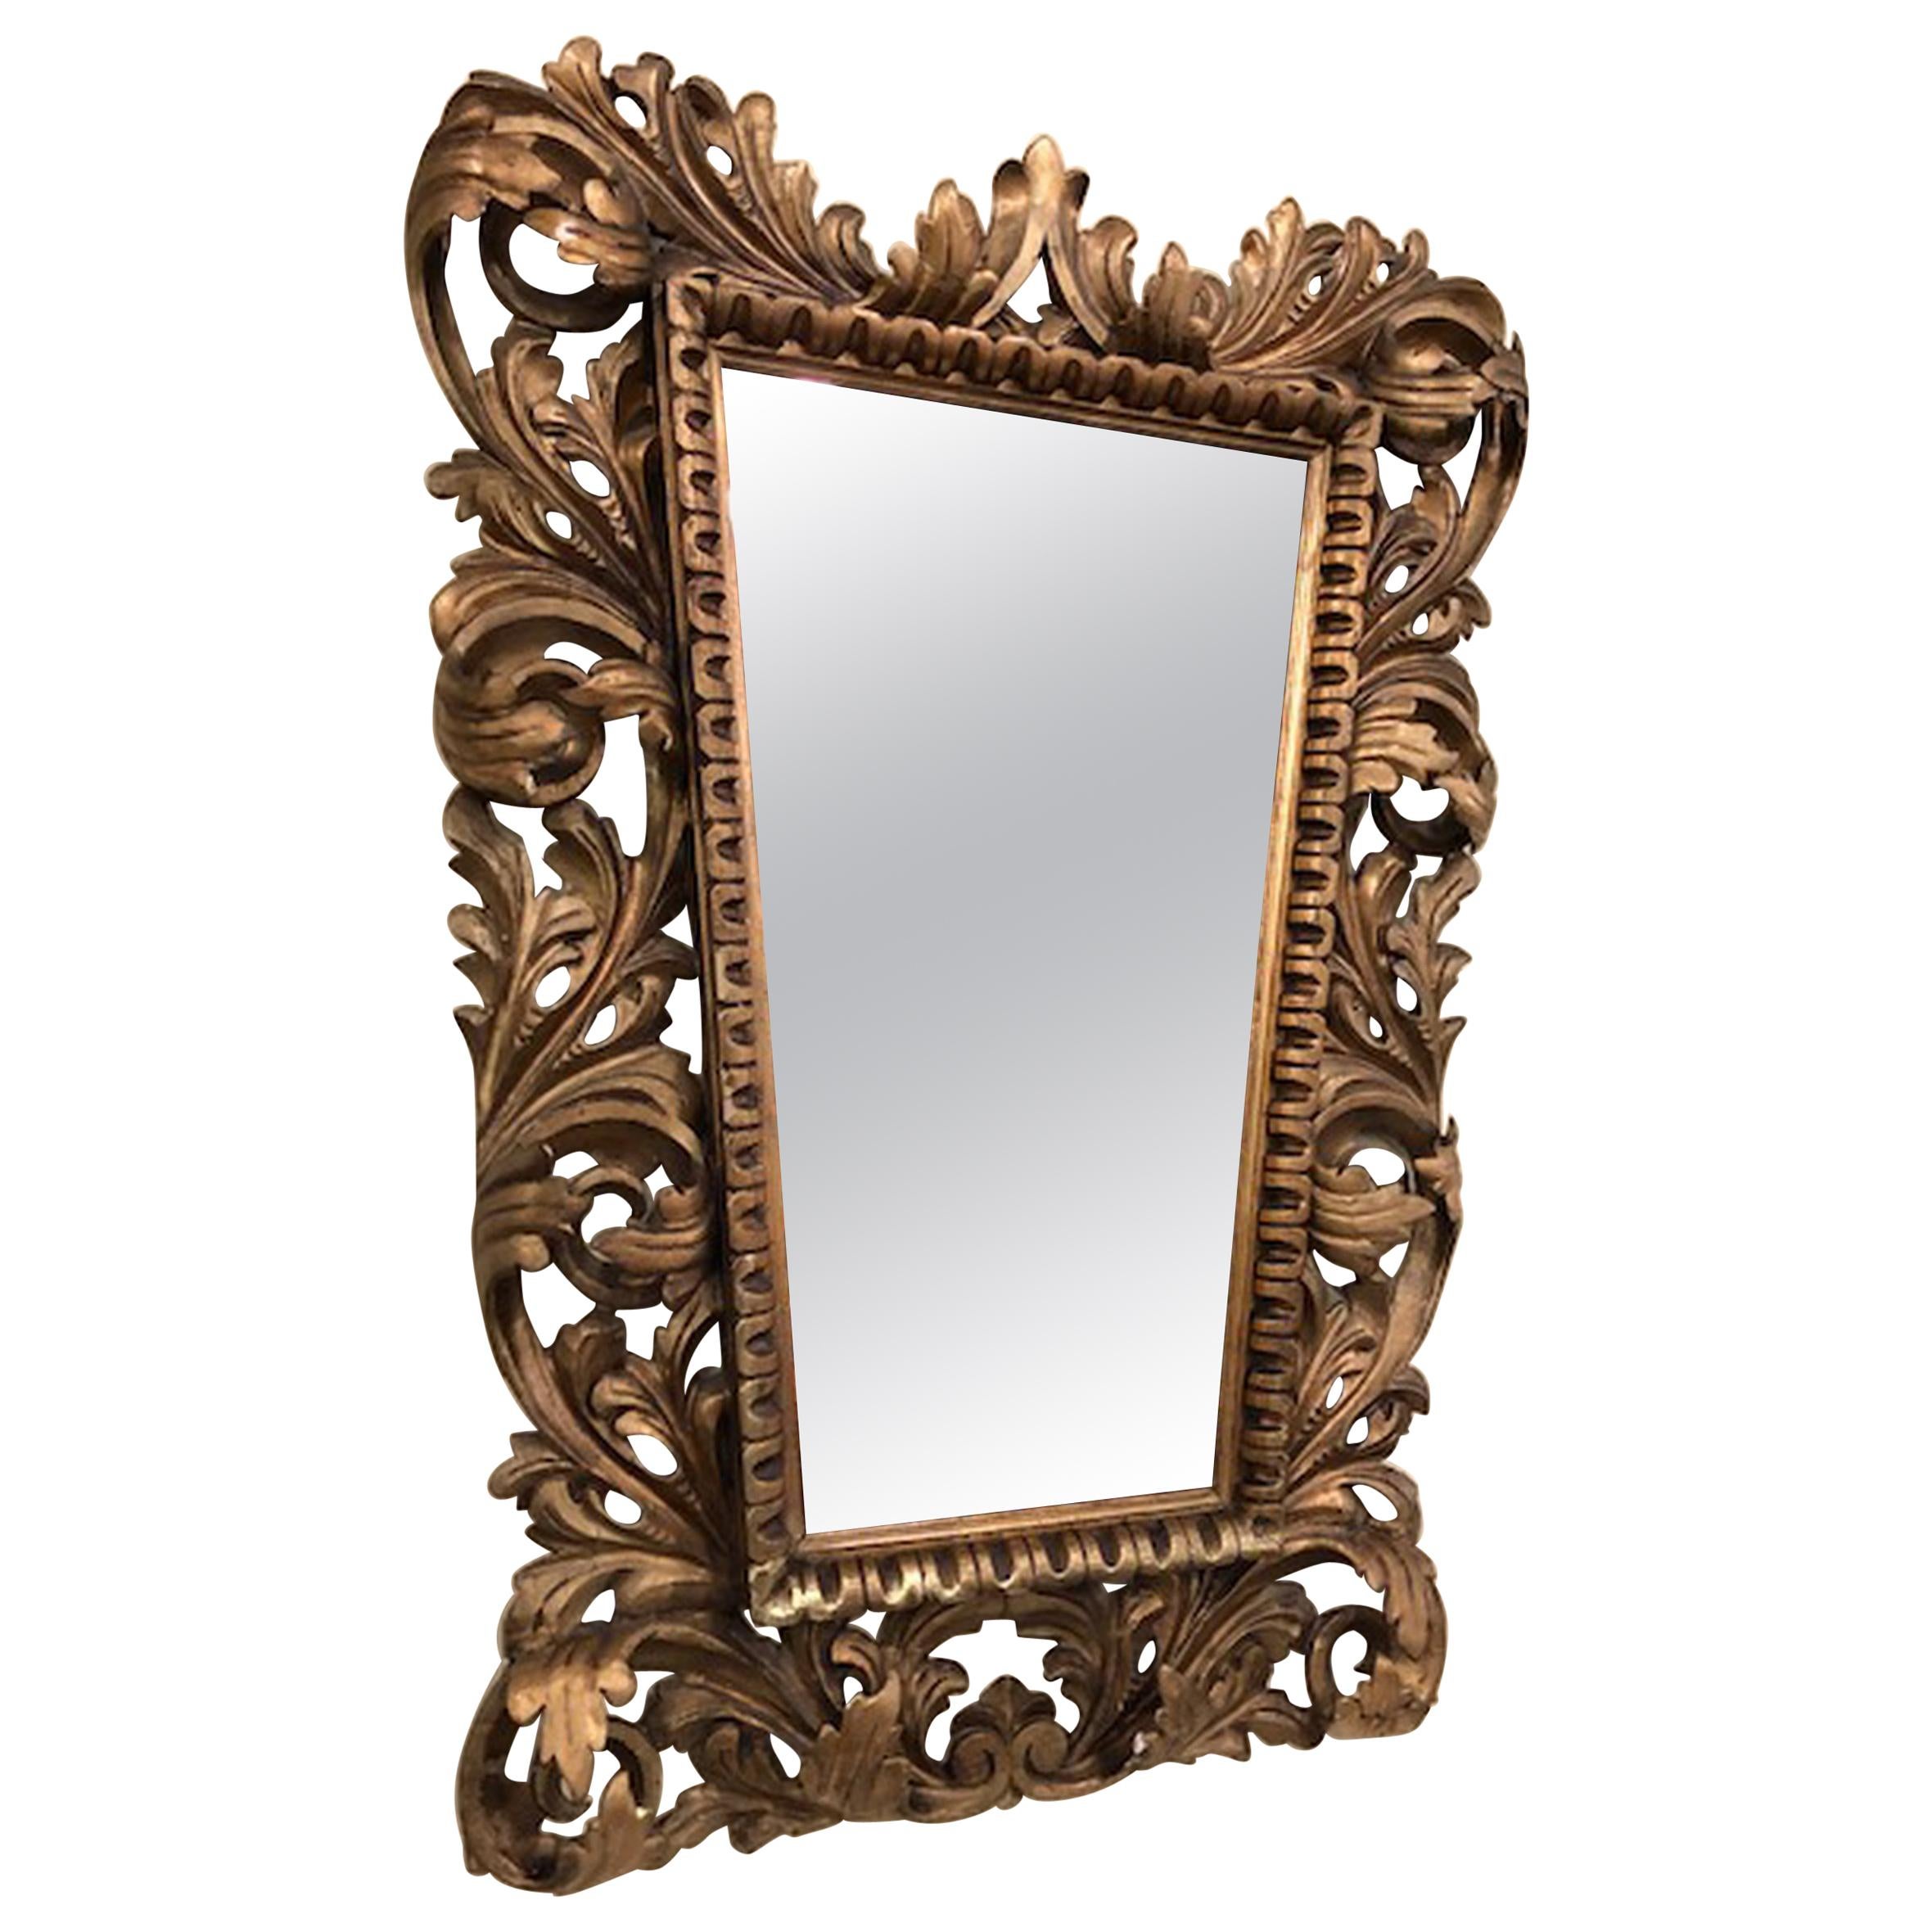 Gilded Florentine Wall Mirror with Leaf and Floral Ornamentation For Sale